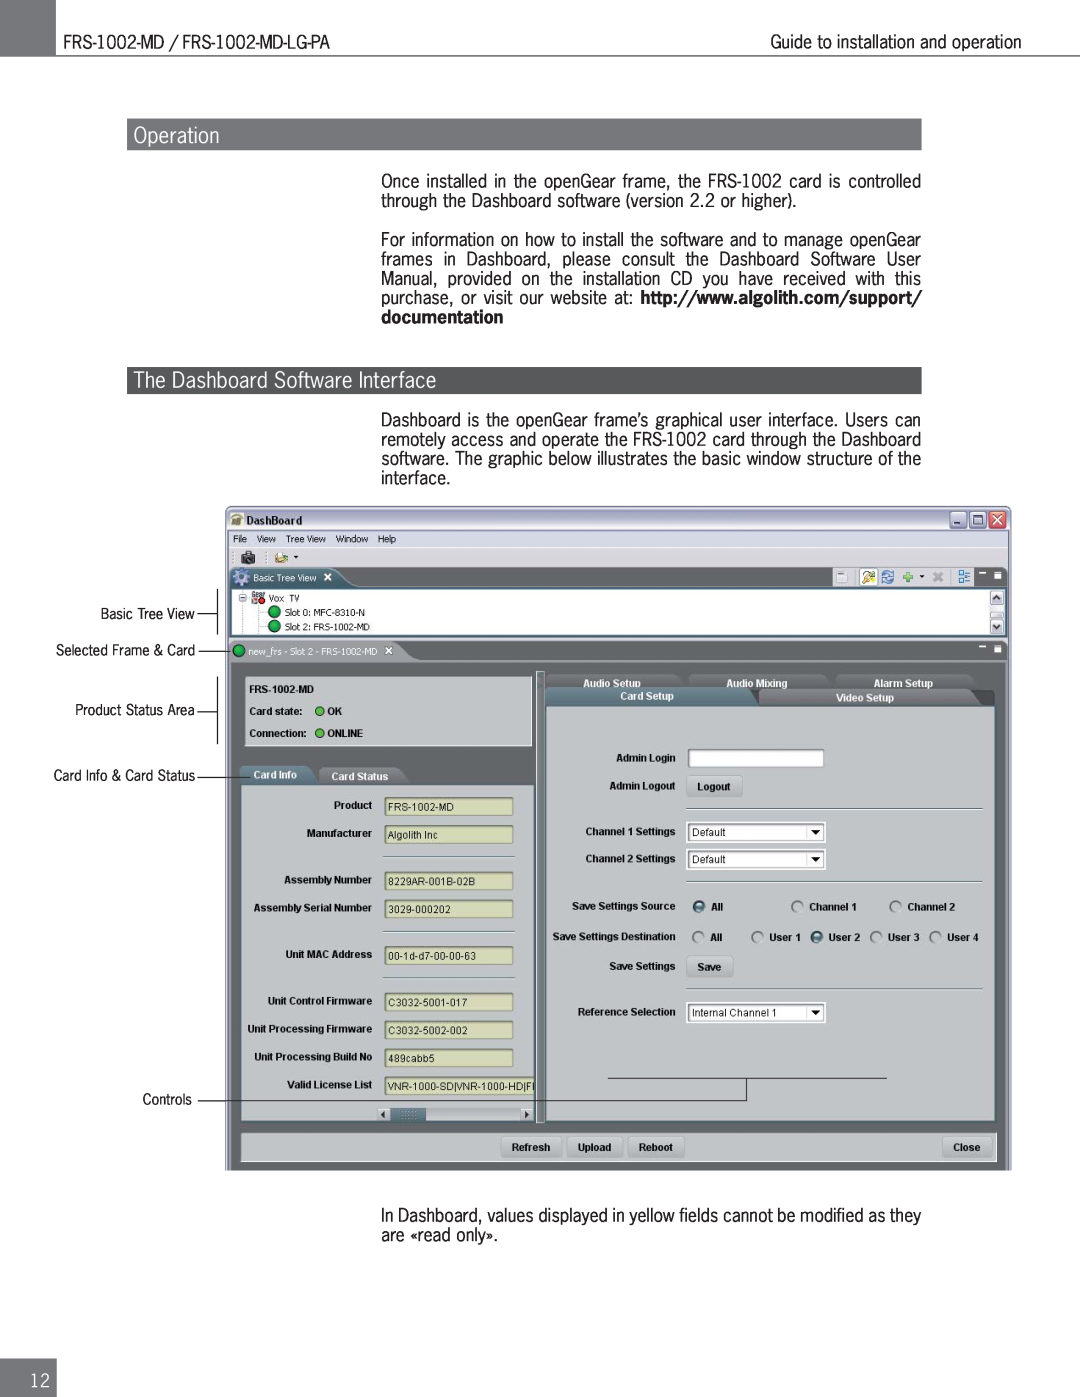 Algolith FRS-1002-MD operation manual Operation, The Dashboard Software Interface 